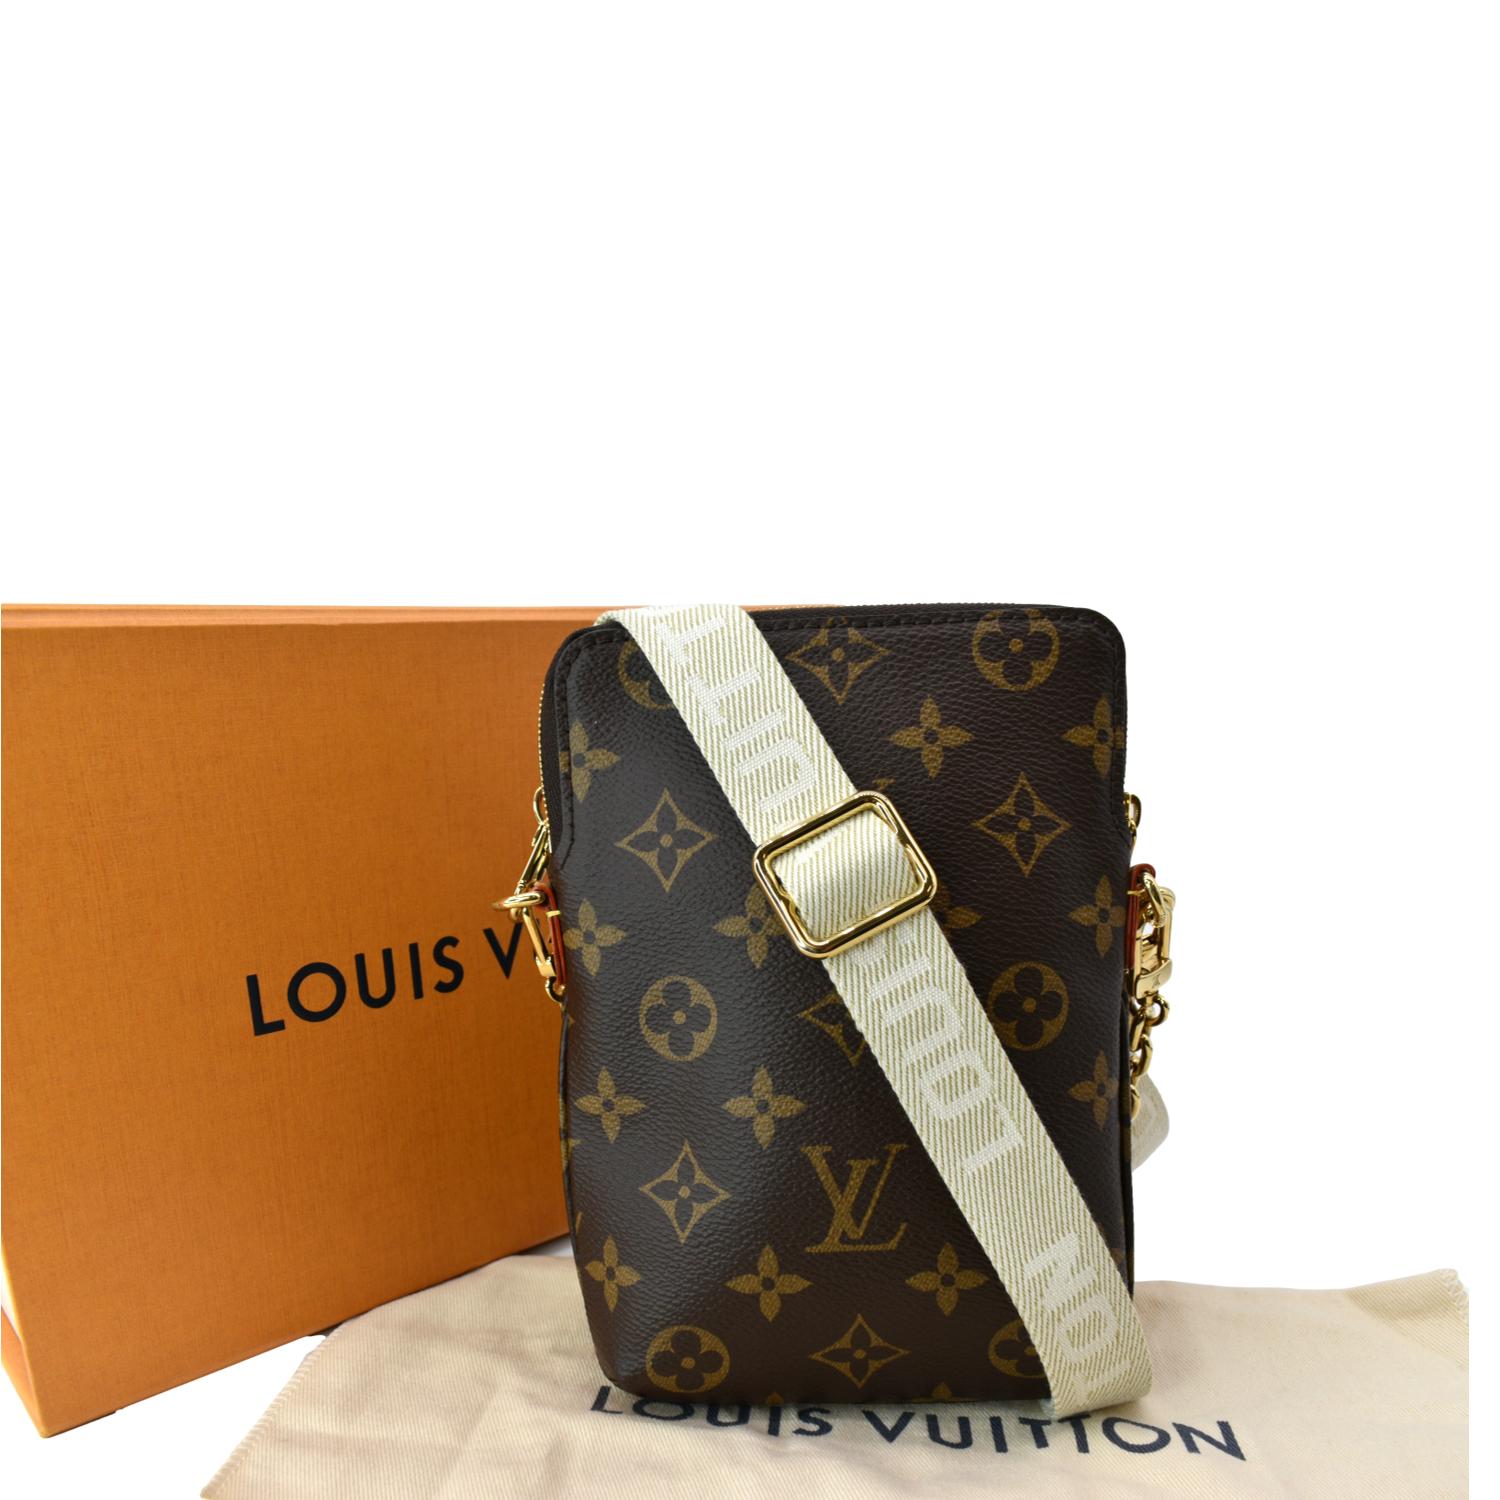 Louis Vuitton New LV Utility Phone Sleeve Bag Unboxing plus What Fits  Inside